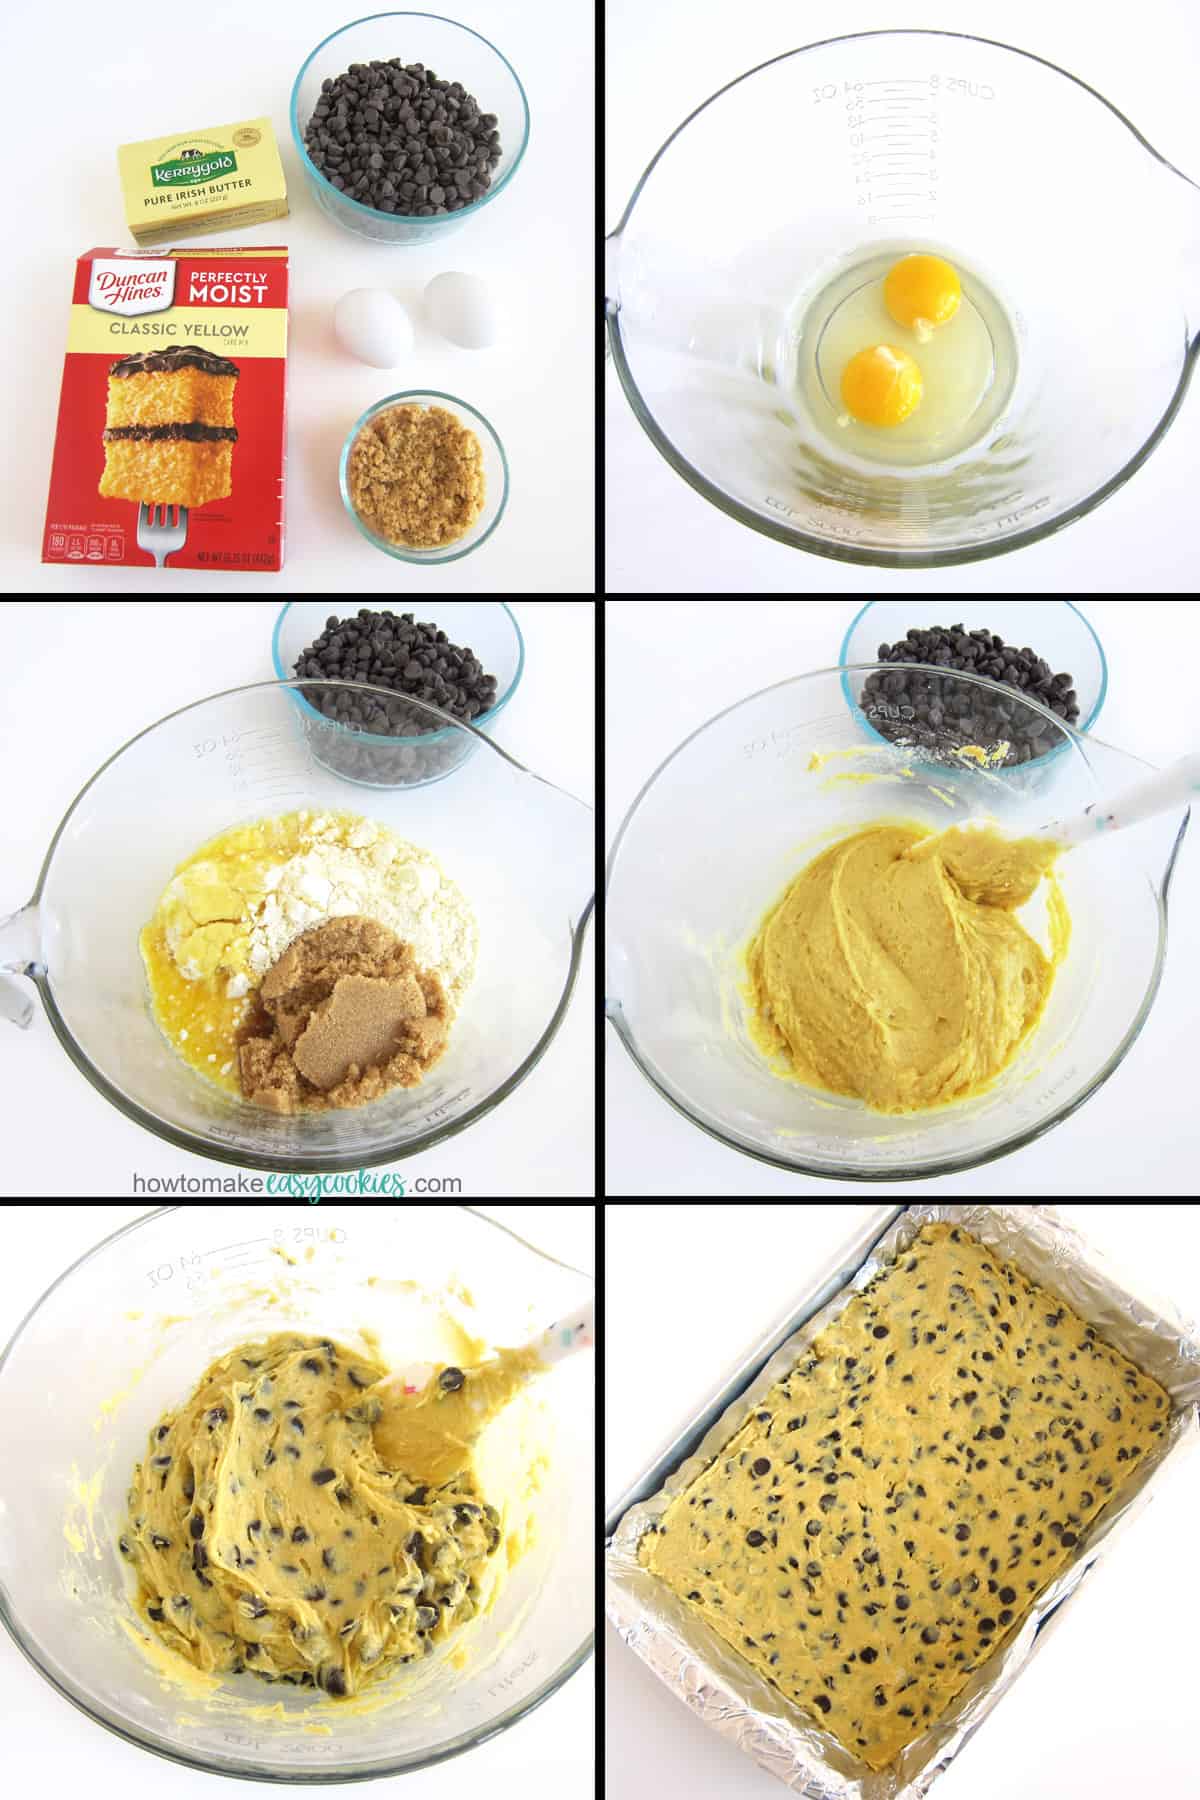 make Duncan Hines yellow cake mix chocolate chip cookie bars by mixing eggs, melted butter, and brown sugar, and chocolate chips with the cake mix